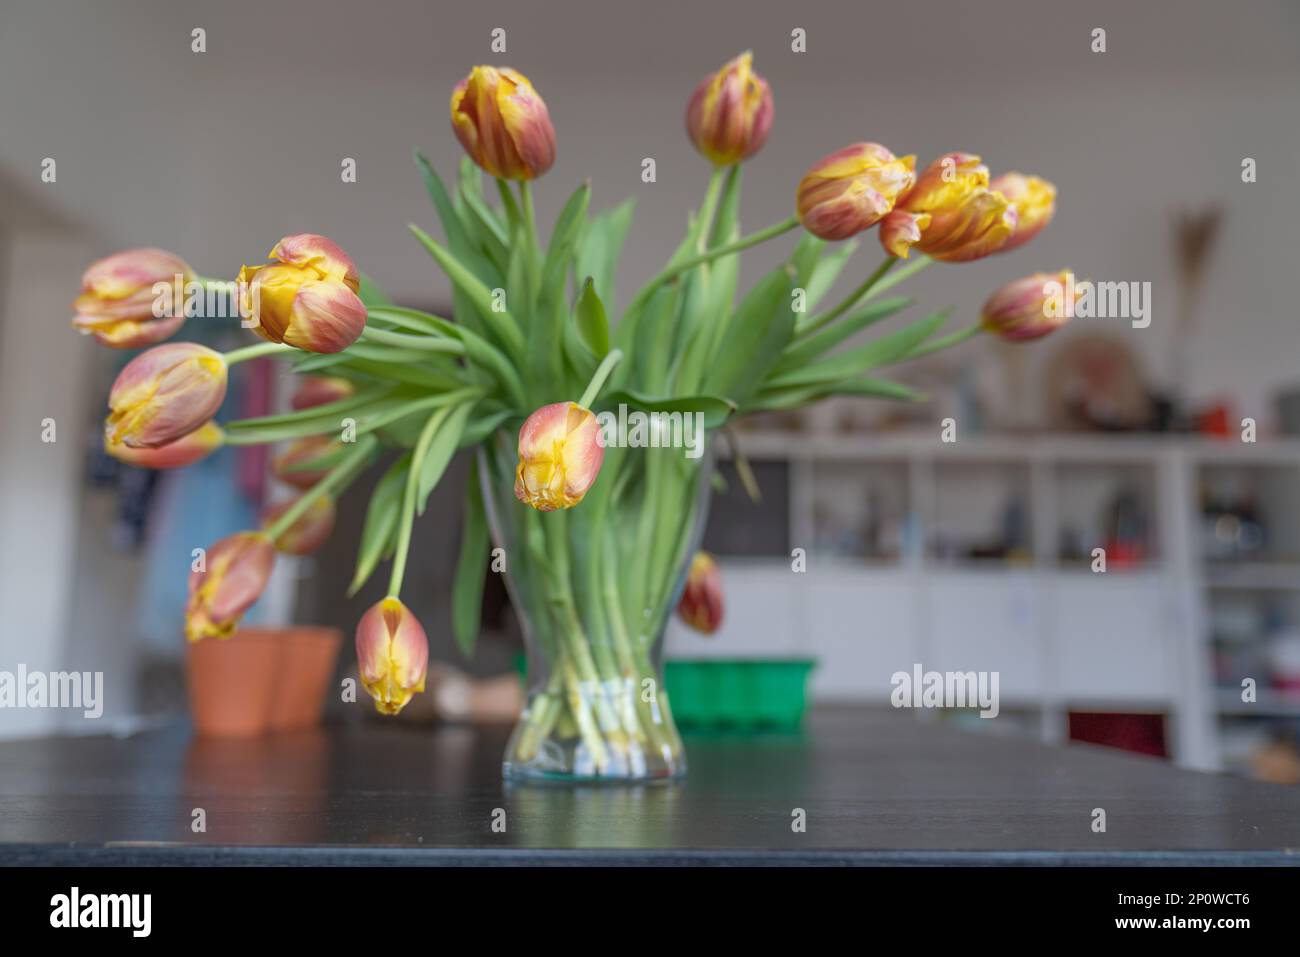 Bouquet of tulips in a transparent vase on the table in the apartment with a wardrobe on the background. Stock Photo